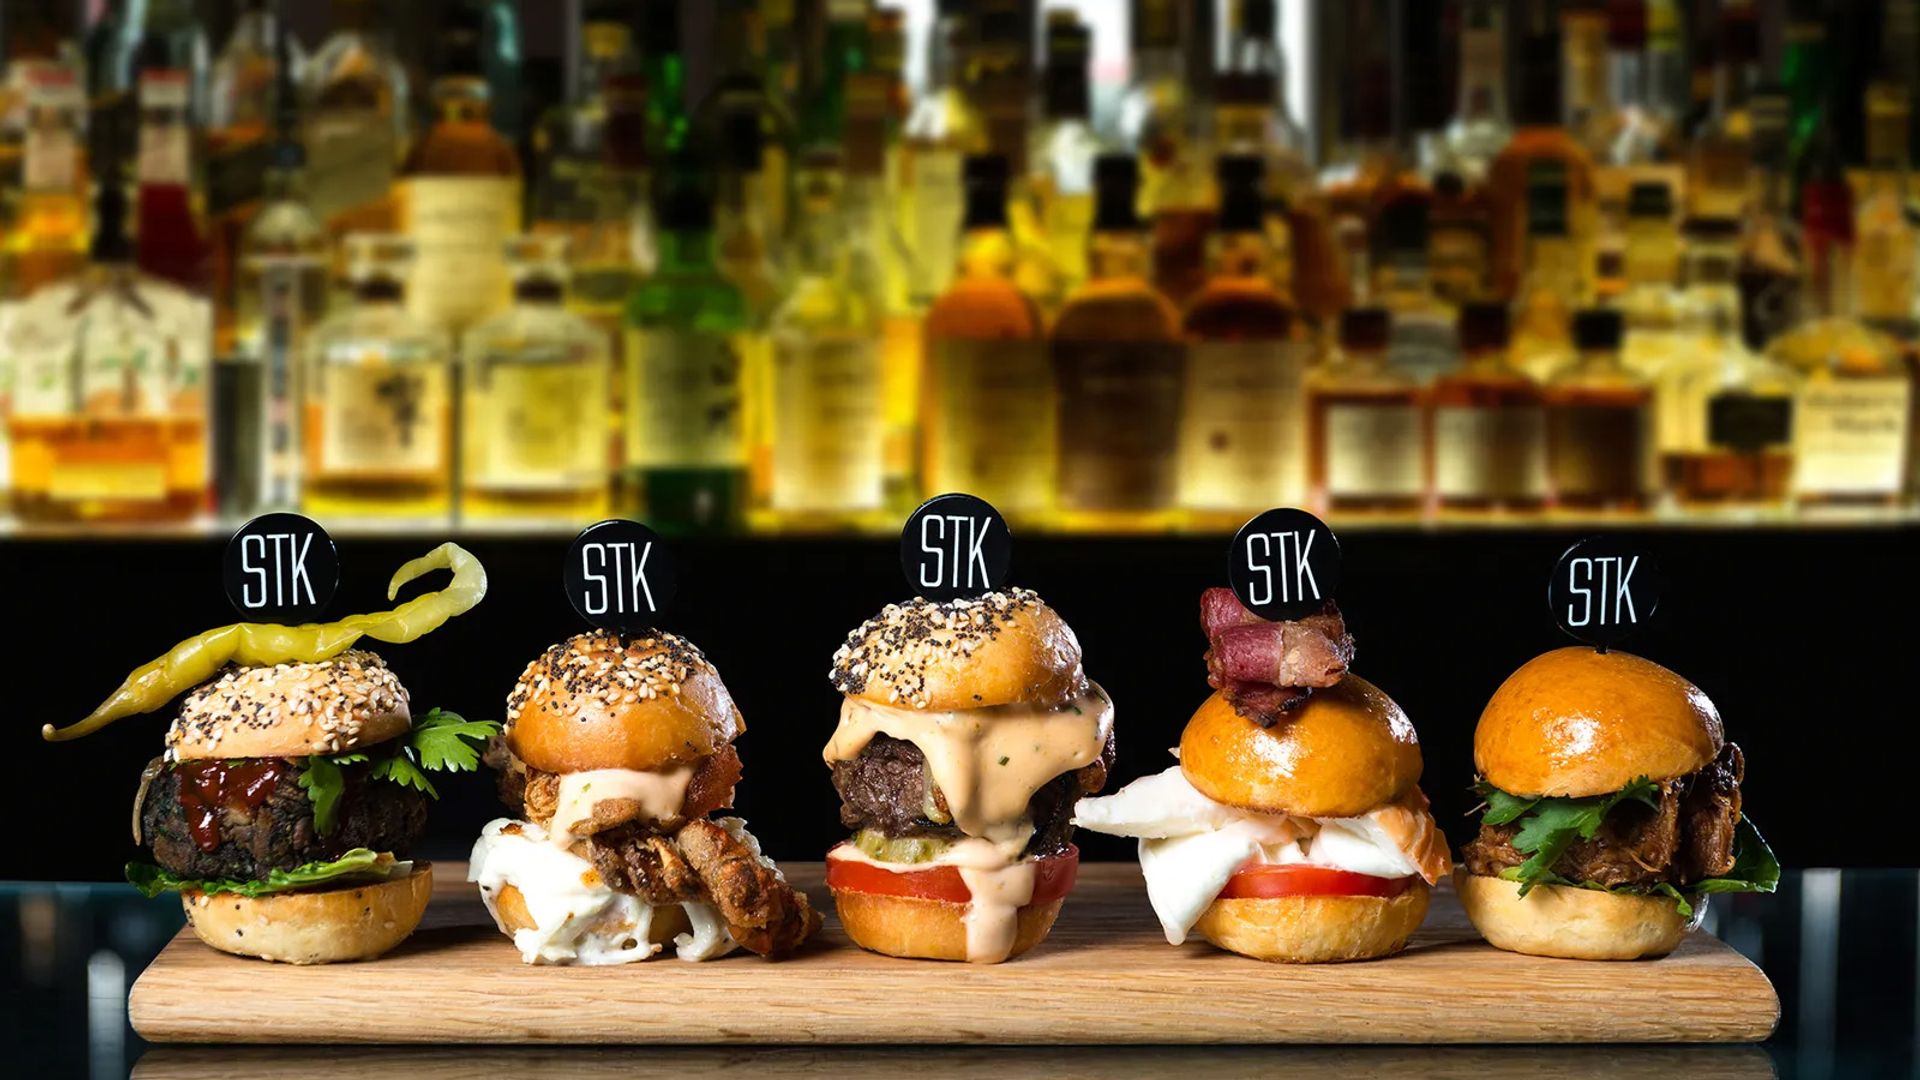 It's all about the steak at STK London but the burgers deserve a mention too!